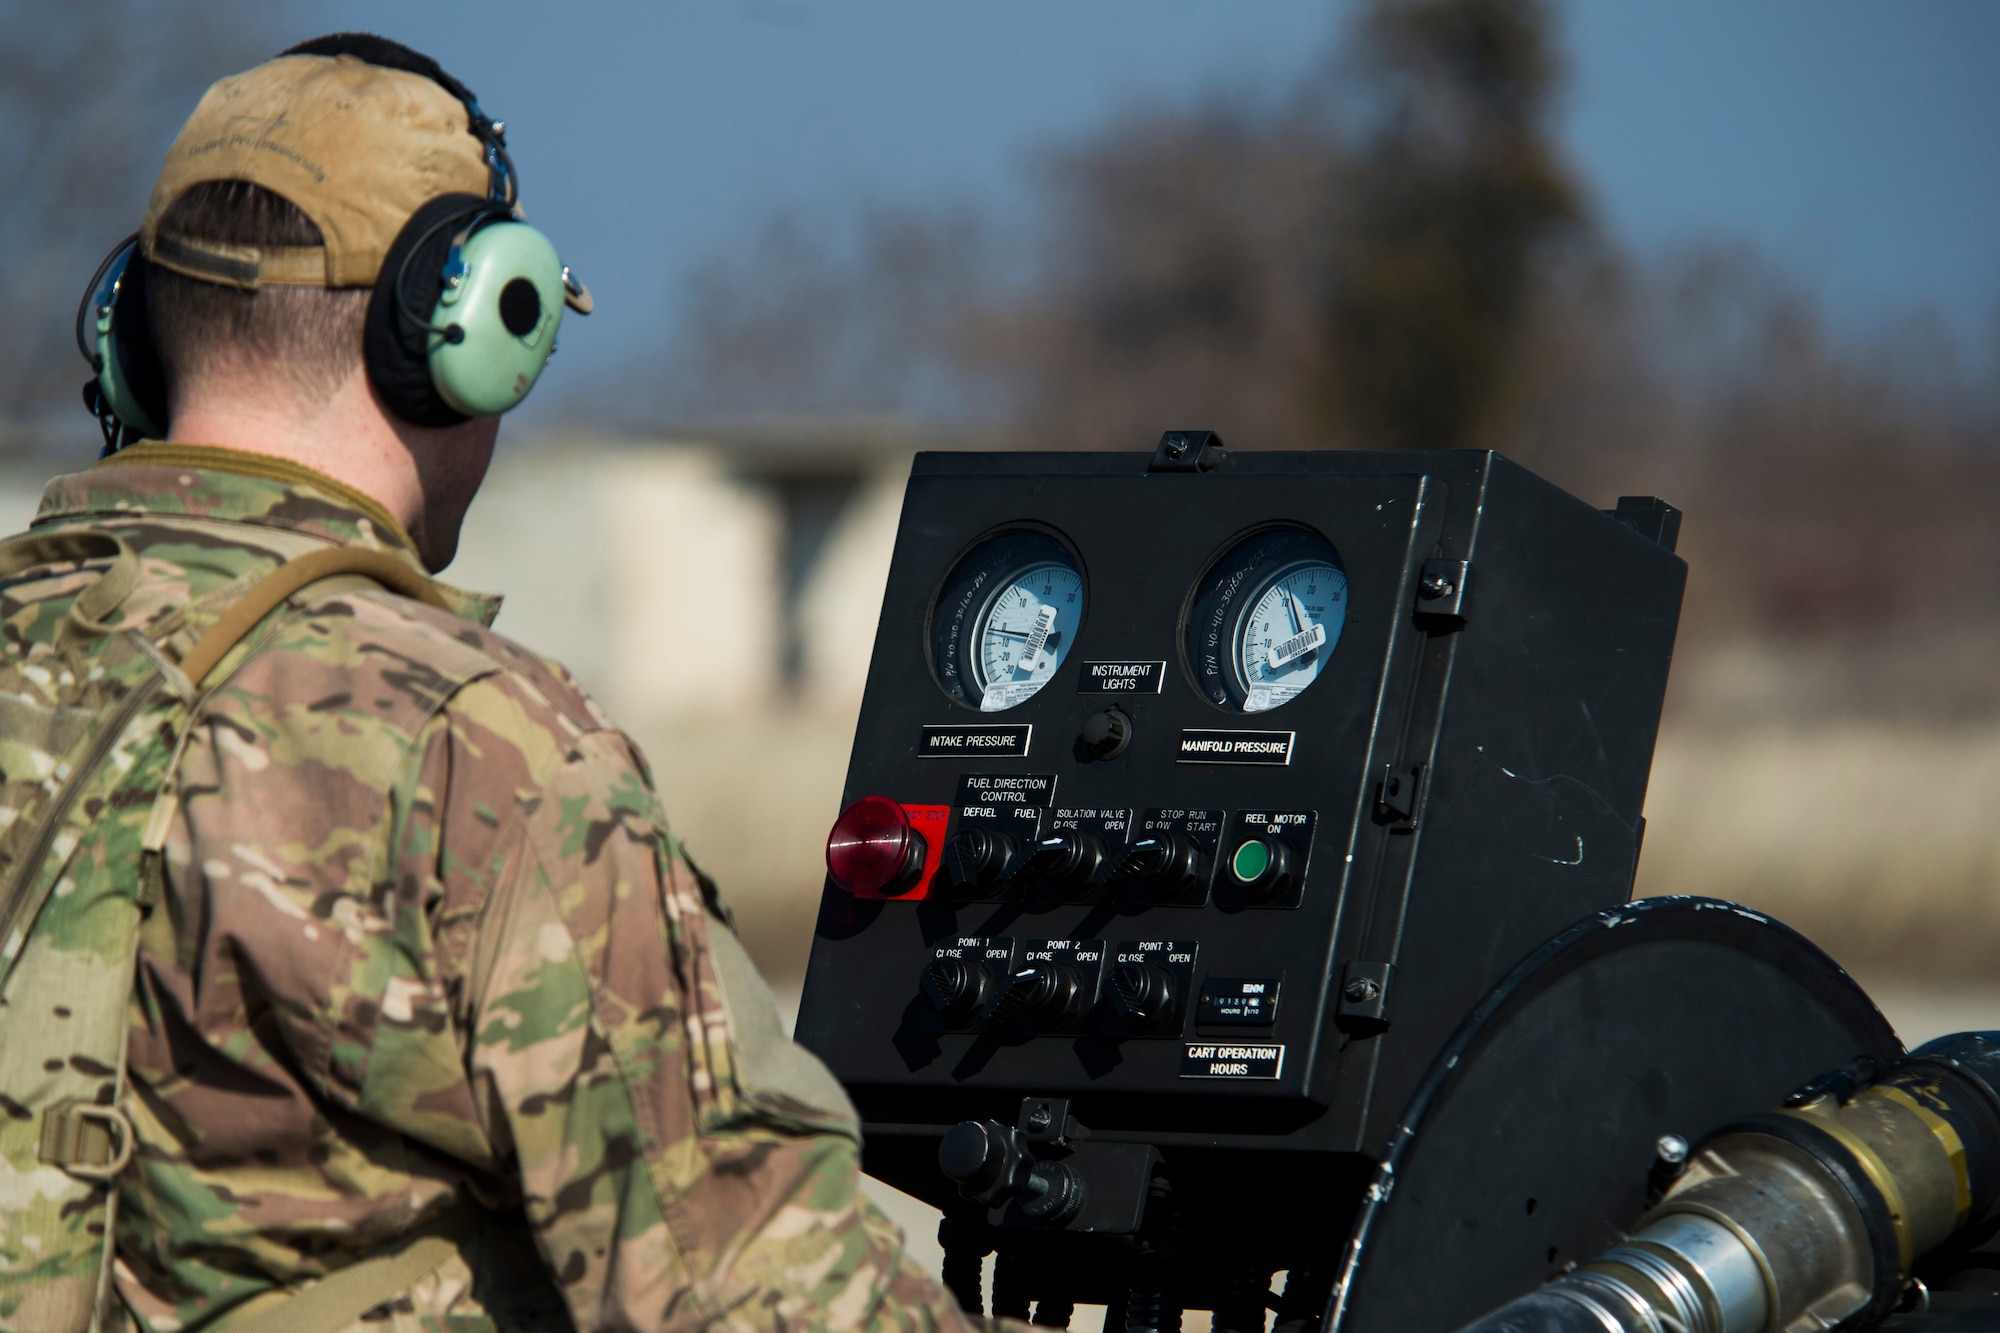 A member of the 67th Special Operations Squadron watches gages on a forward area manifold cart while refueling a 74th Expeditionary Fighter Squadron A-10C Thunderbolt II aircraft during forward area refueling point training at Plovdiv, Bulgaria, Feb. 9, 2016. A single A-10 usually receives approximately 2,000 pounds of fuel in a five-to-seven-minute span during FARP training. (U.S. Air Force photo by Airman 1st Class Luke Kitterman/Released)